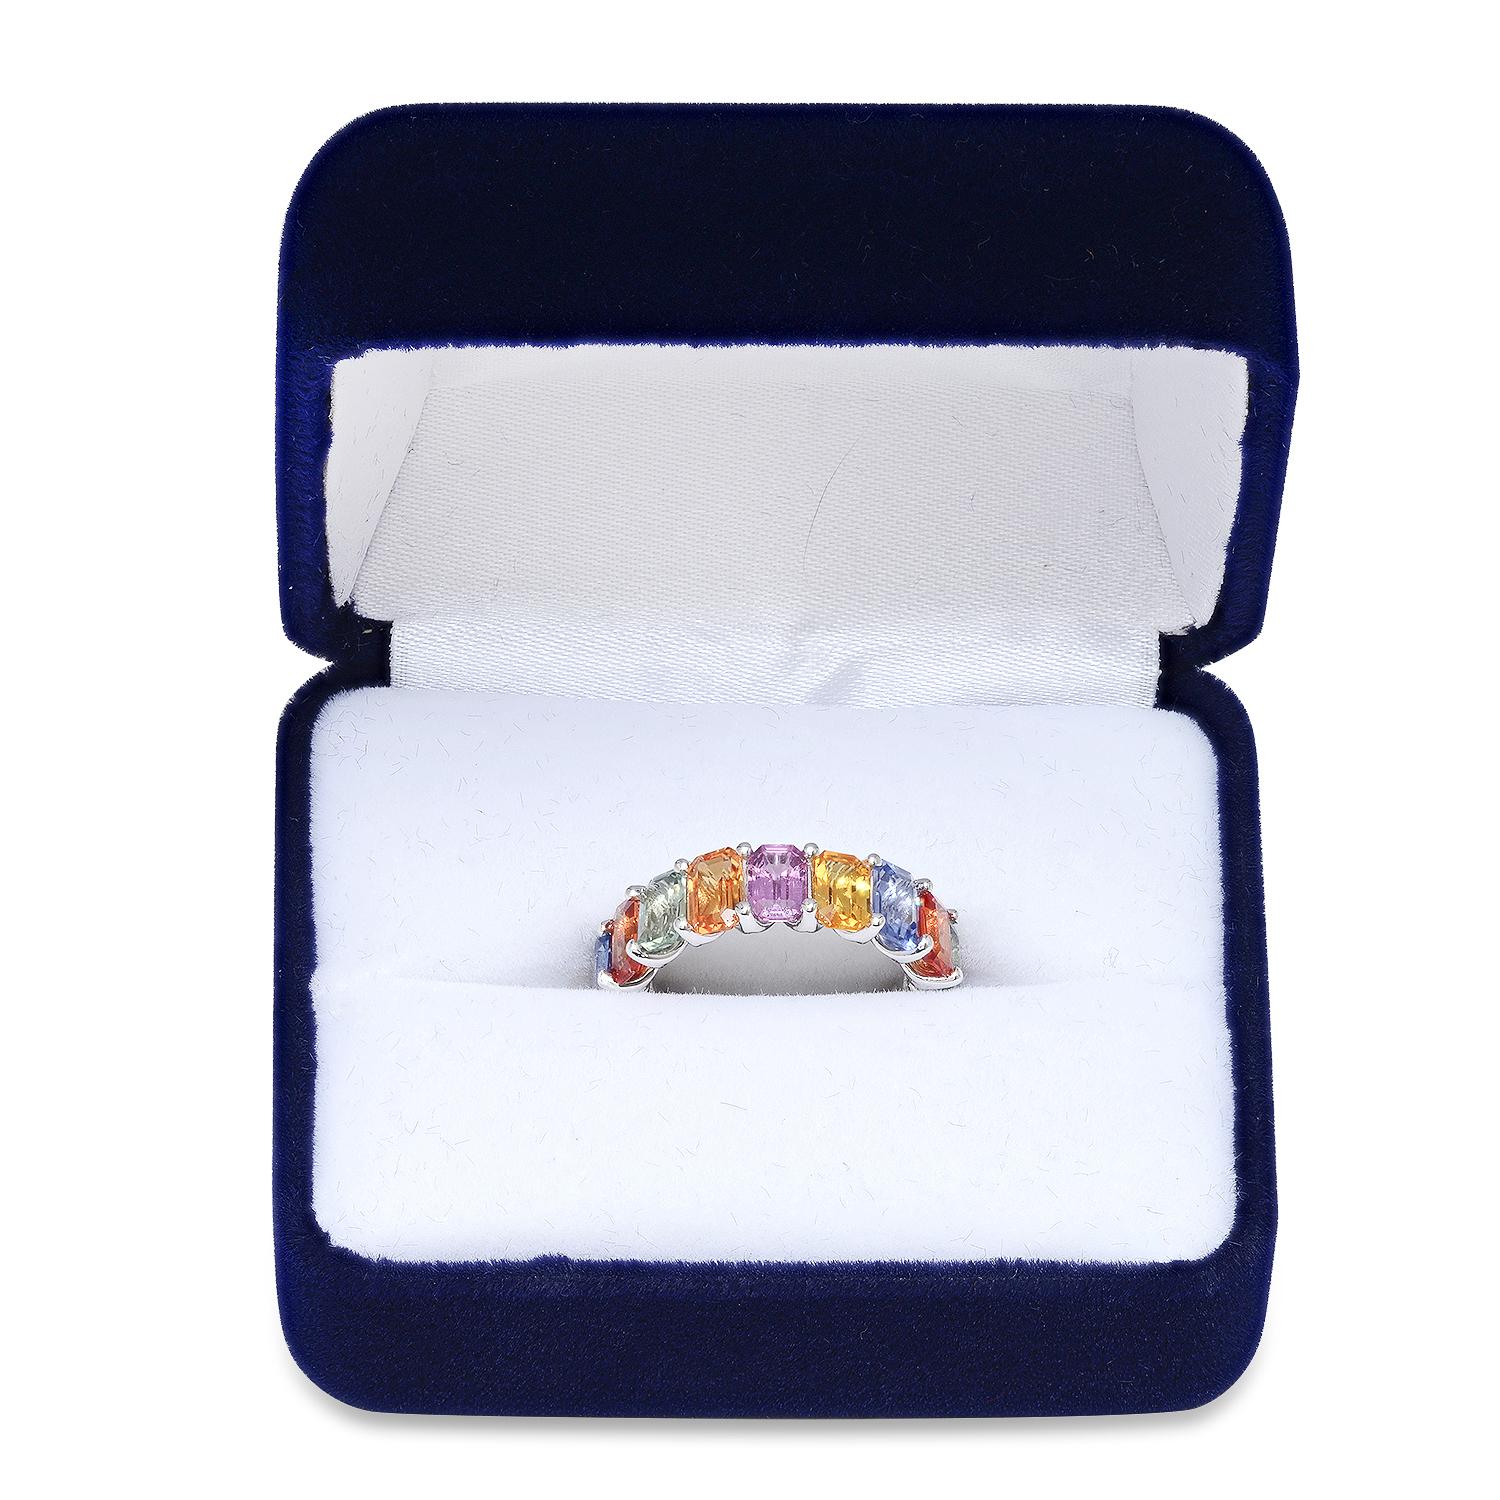 14K White Gold and 4.51ct Multi colored Sapphire Eternity Band